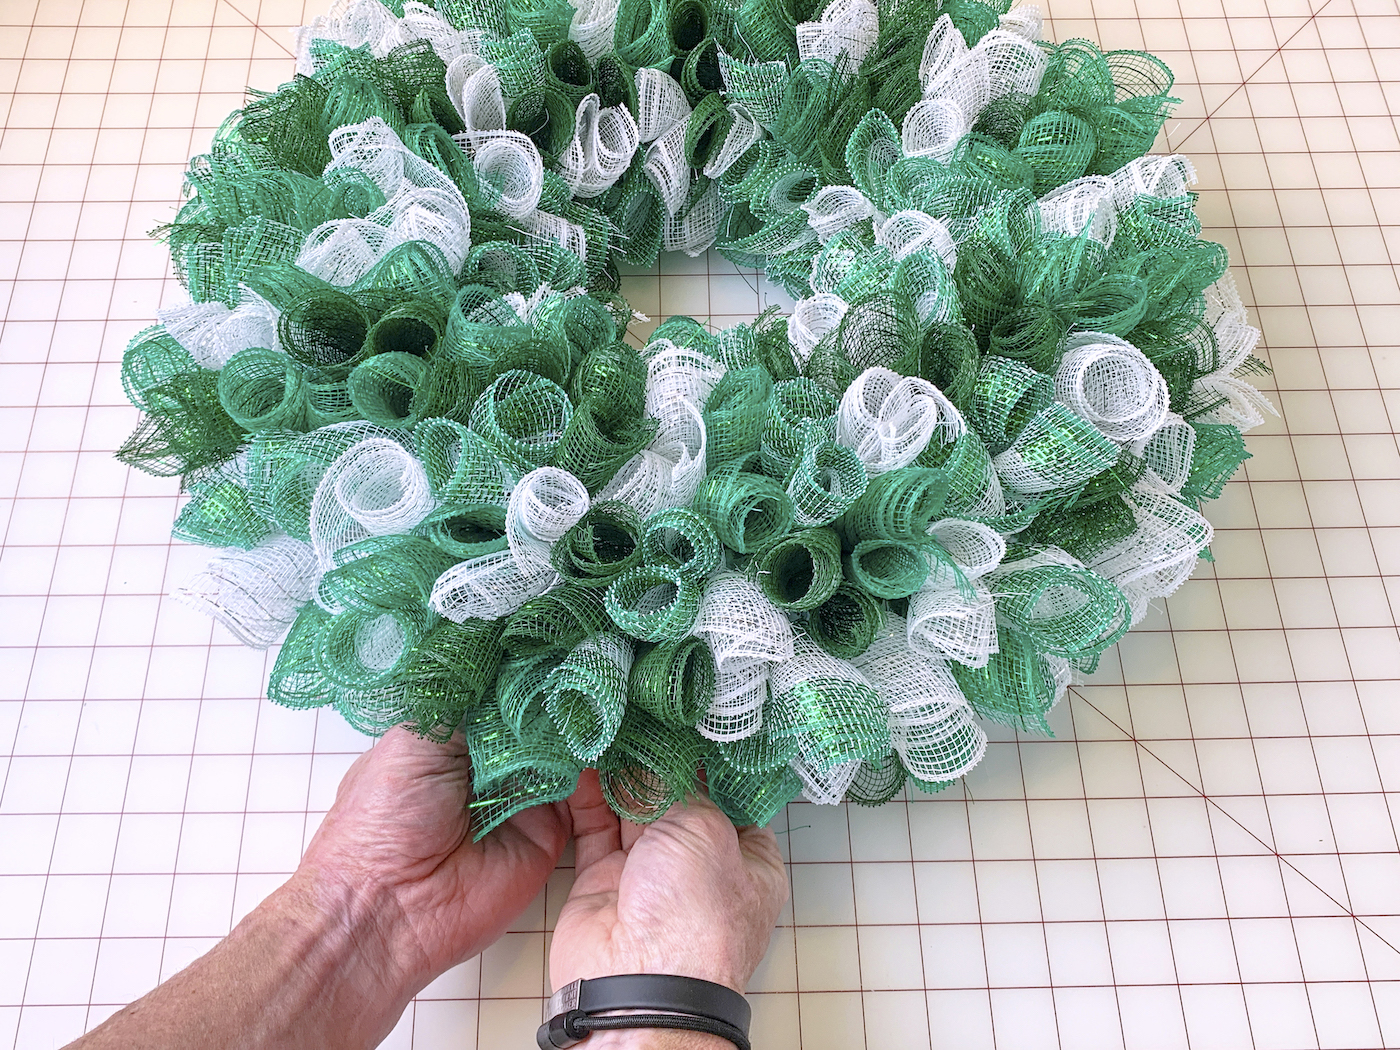 Attaching the final mesh piece to the St. Patrick's Day wreath